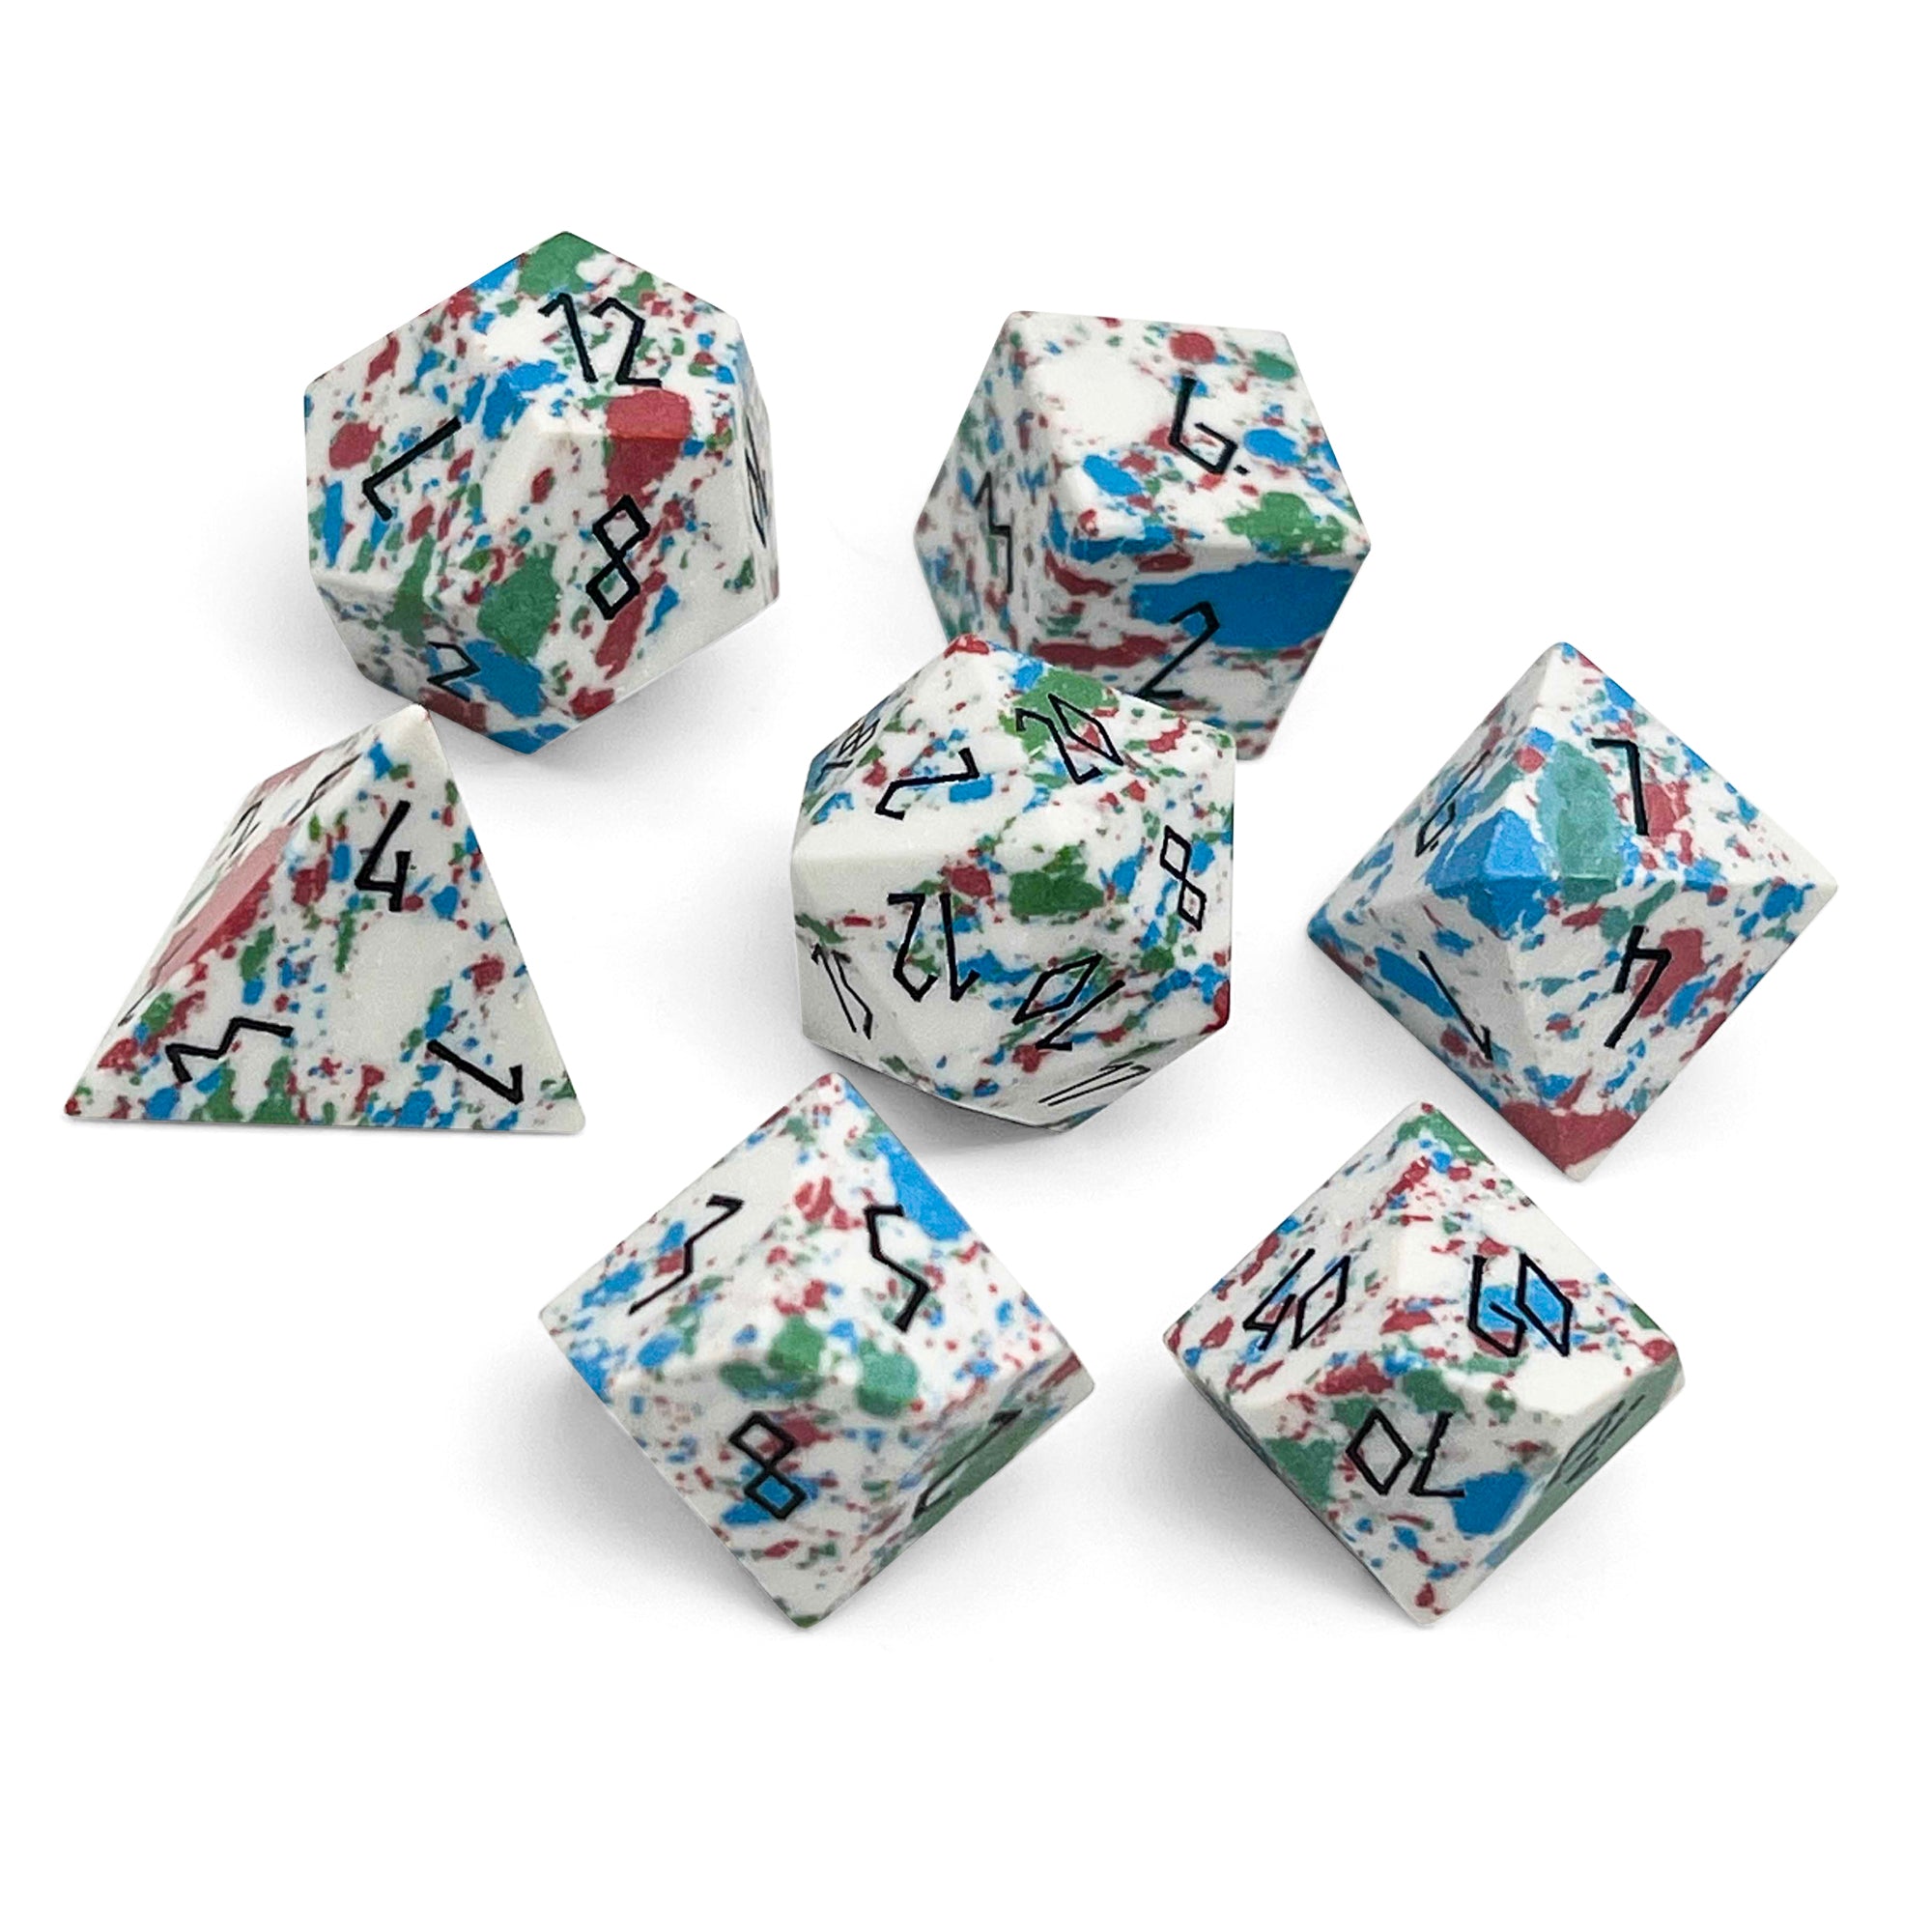 Red, Green, Blue, and White Turquoise - 7 Piece RPG Set TruStone Dice